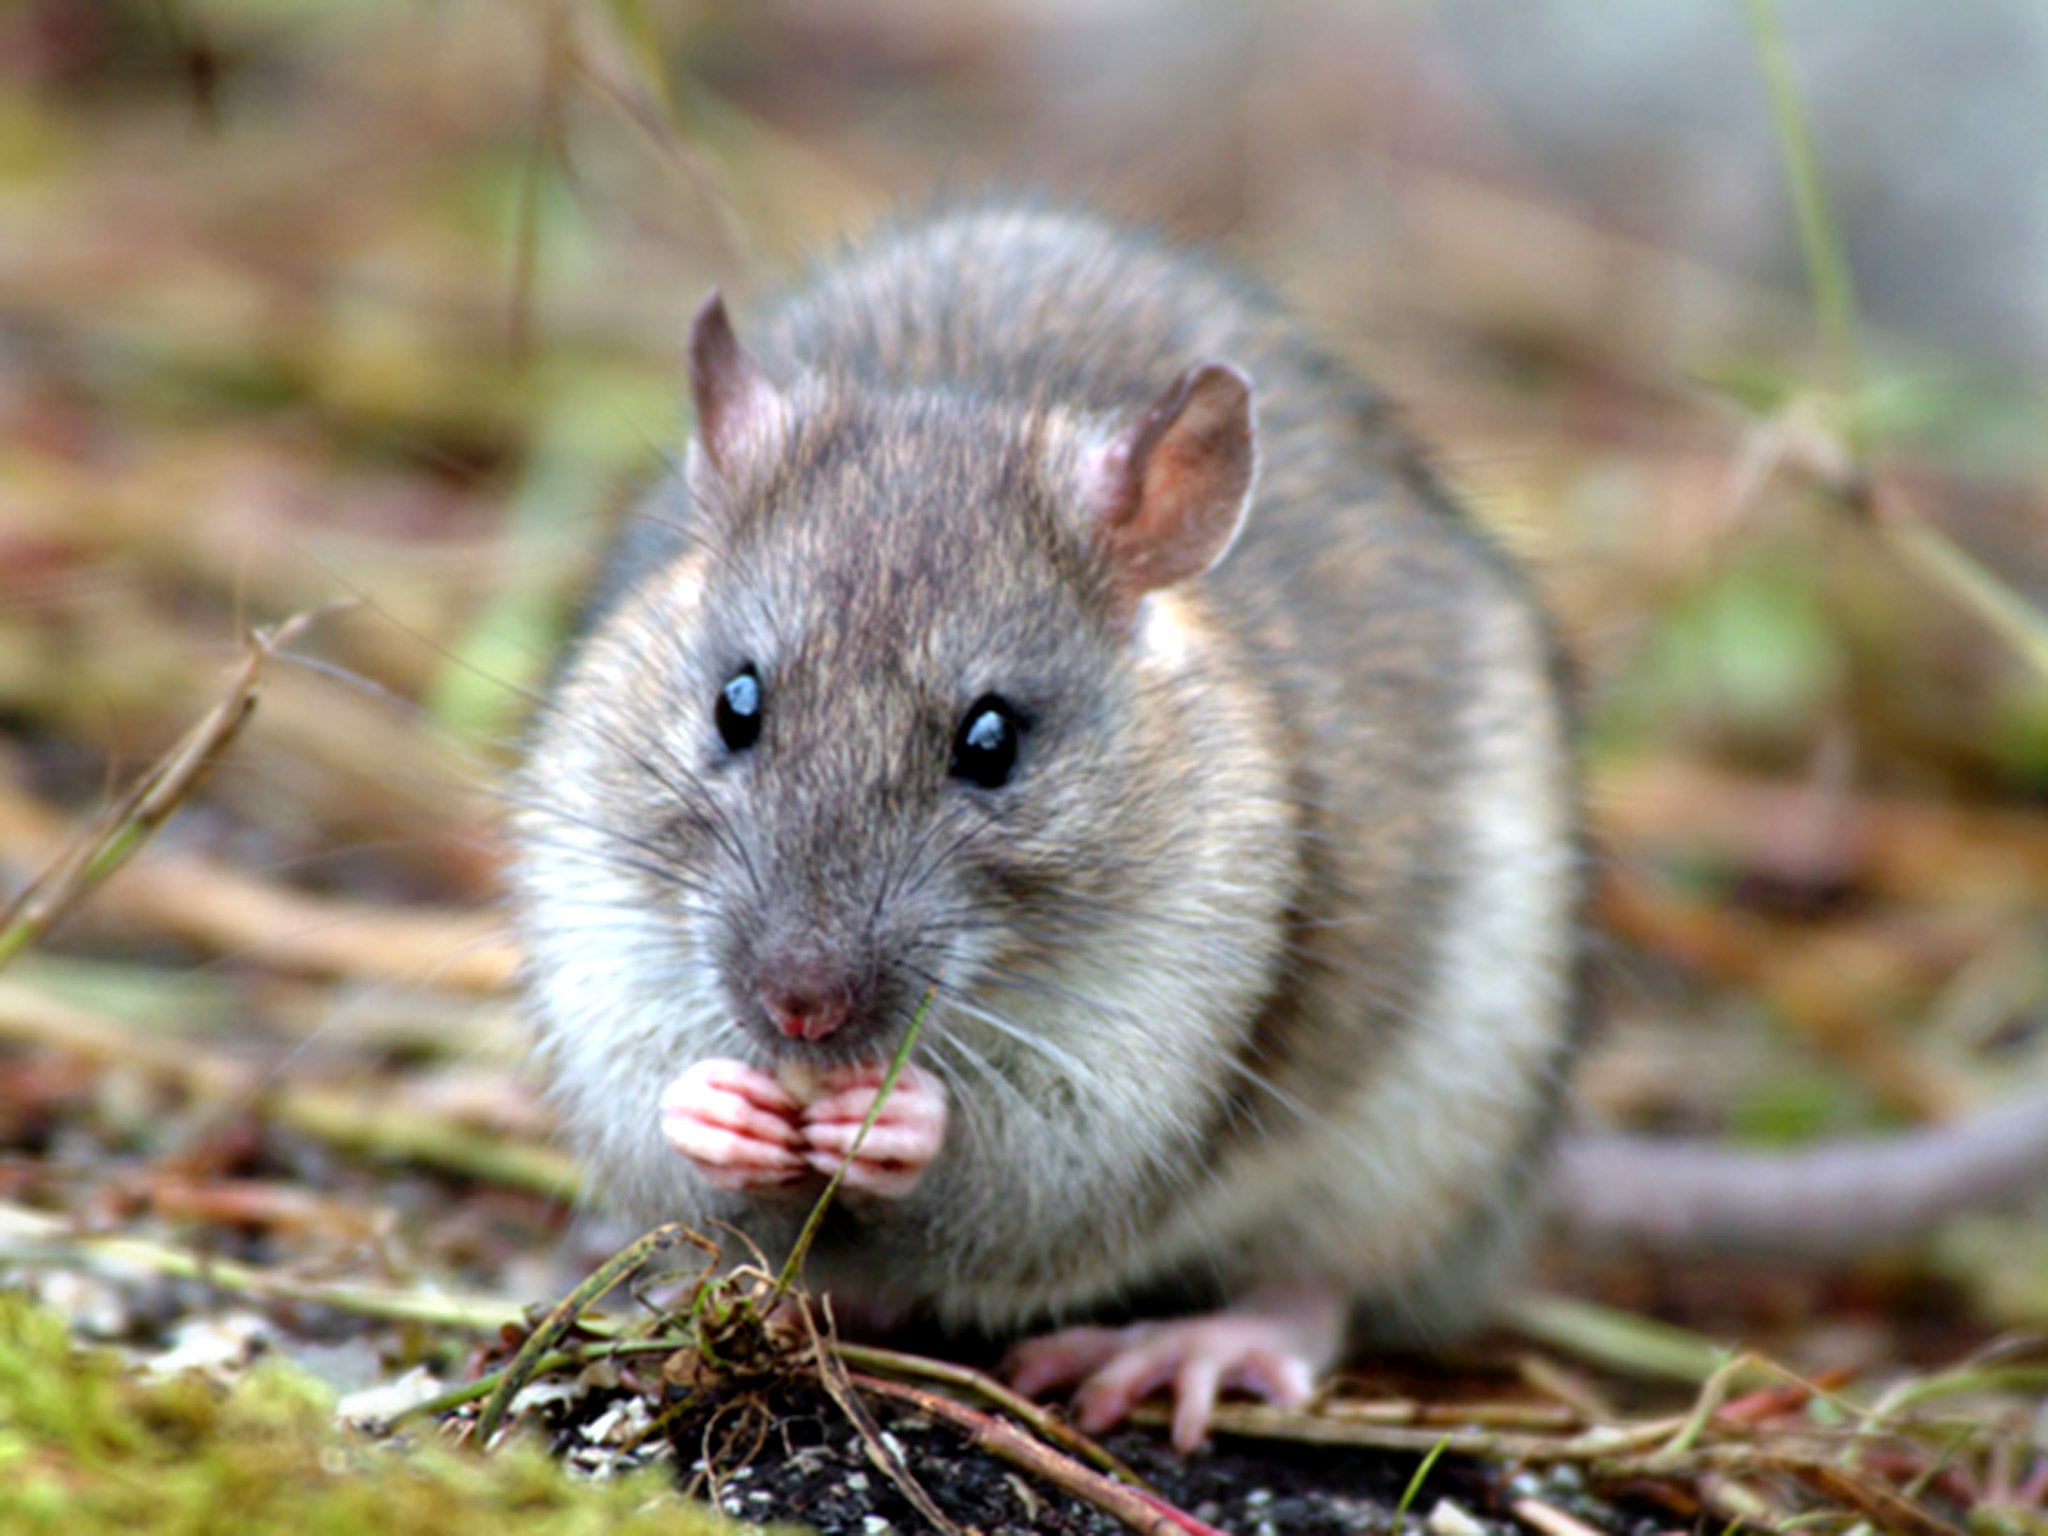 Rats are being used by the Dutch police force